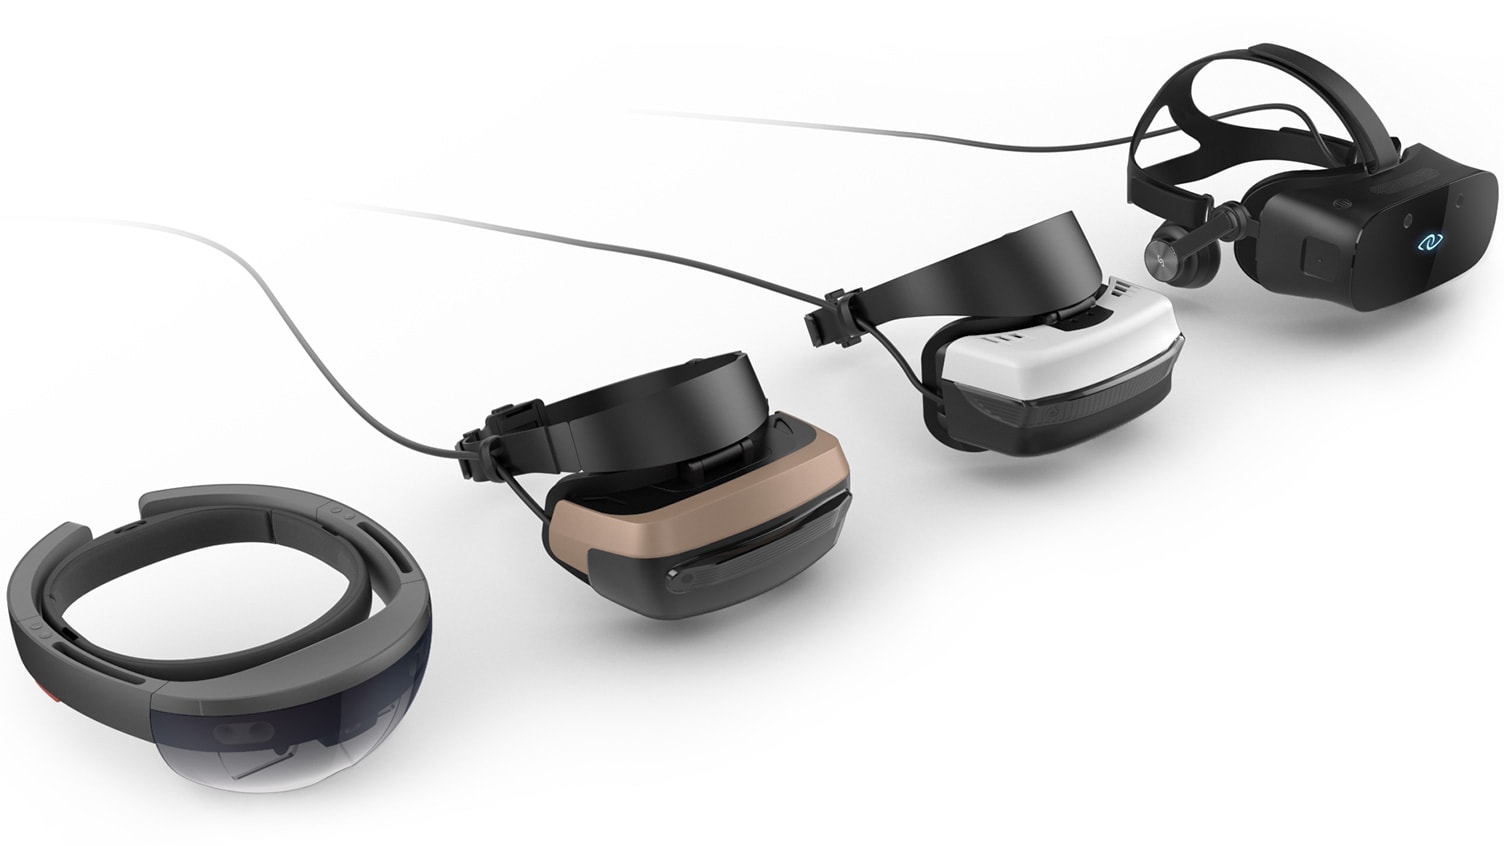 Several virtual reality and mixed reality headsets, including HoloLens, arranged side by side